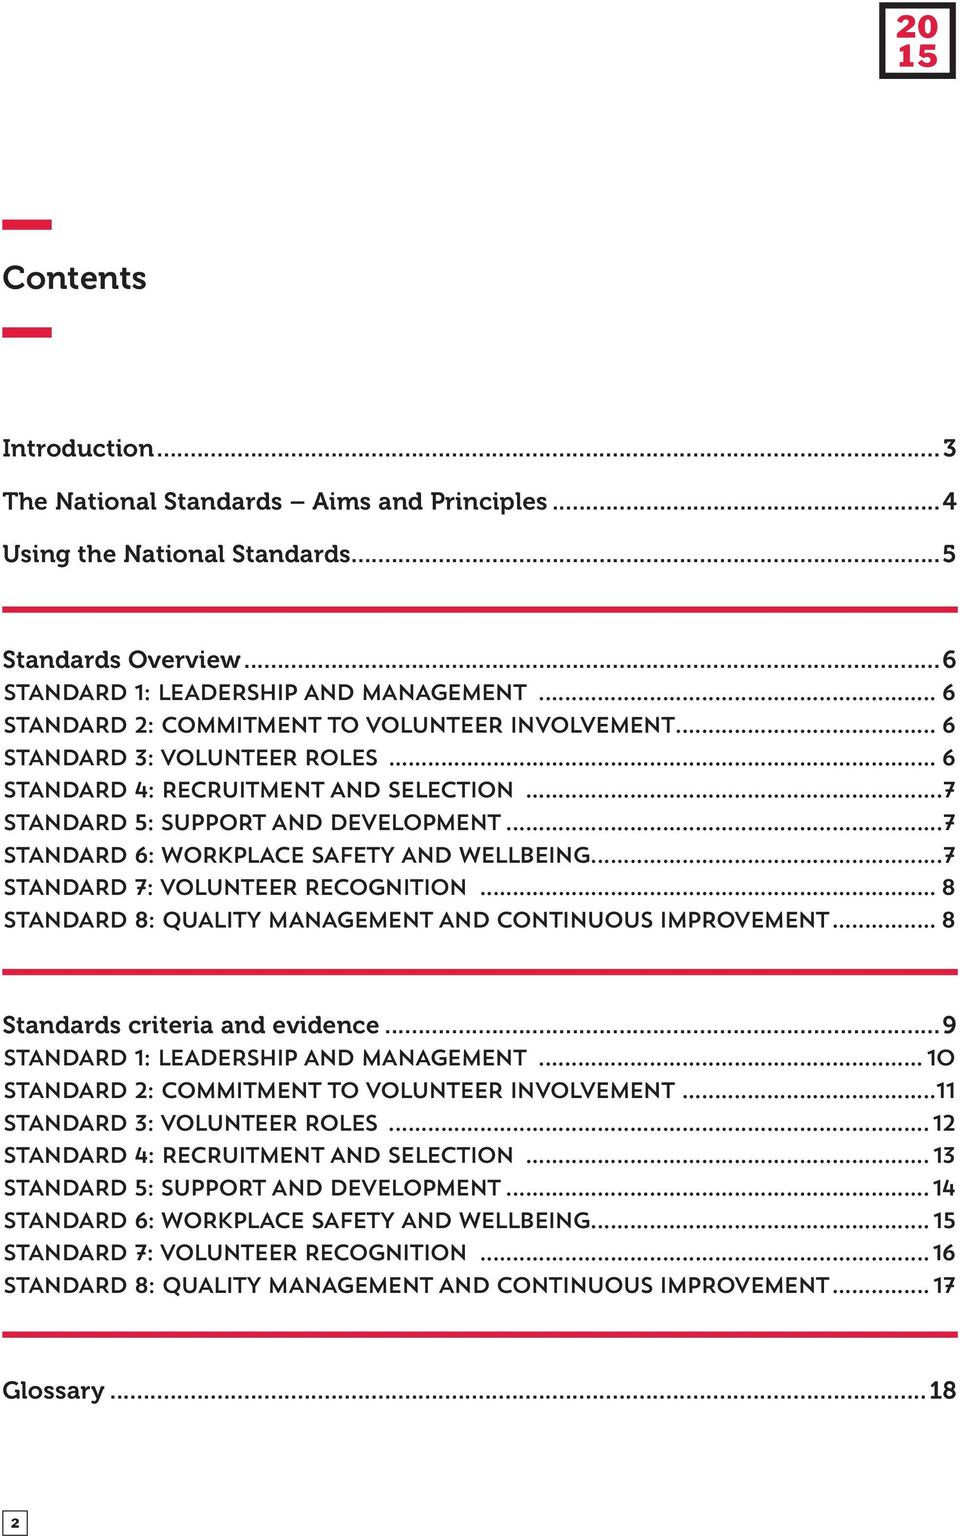 ..7 STANDARD 6: WORKPLACE SAFETY AND WELLBEING...7 STANDARD 7: VOLUNTEER RECOGNITION... 8 STANDARD 8: QUALITY MANAGEMENT AND CONTINUOUS IMPROVEMENT... 8 Standards criteria and evidence.